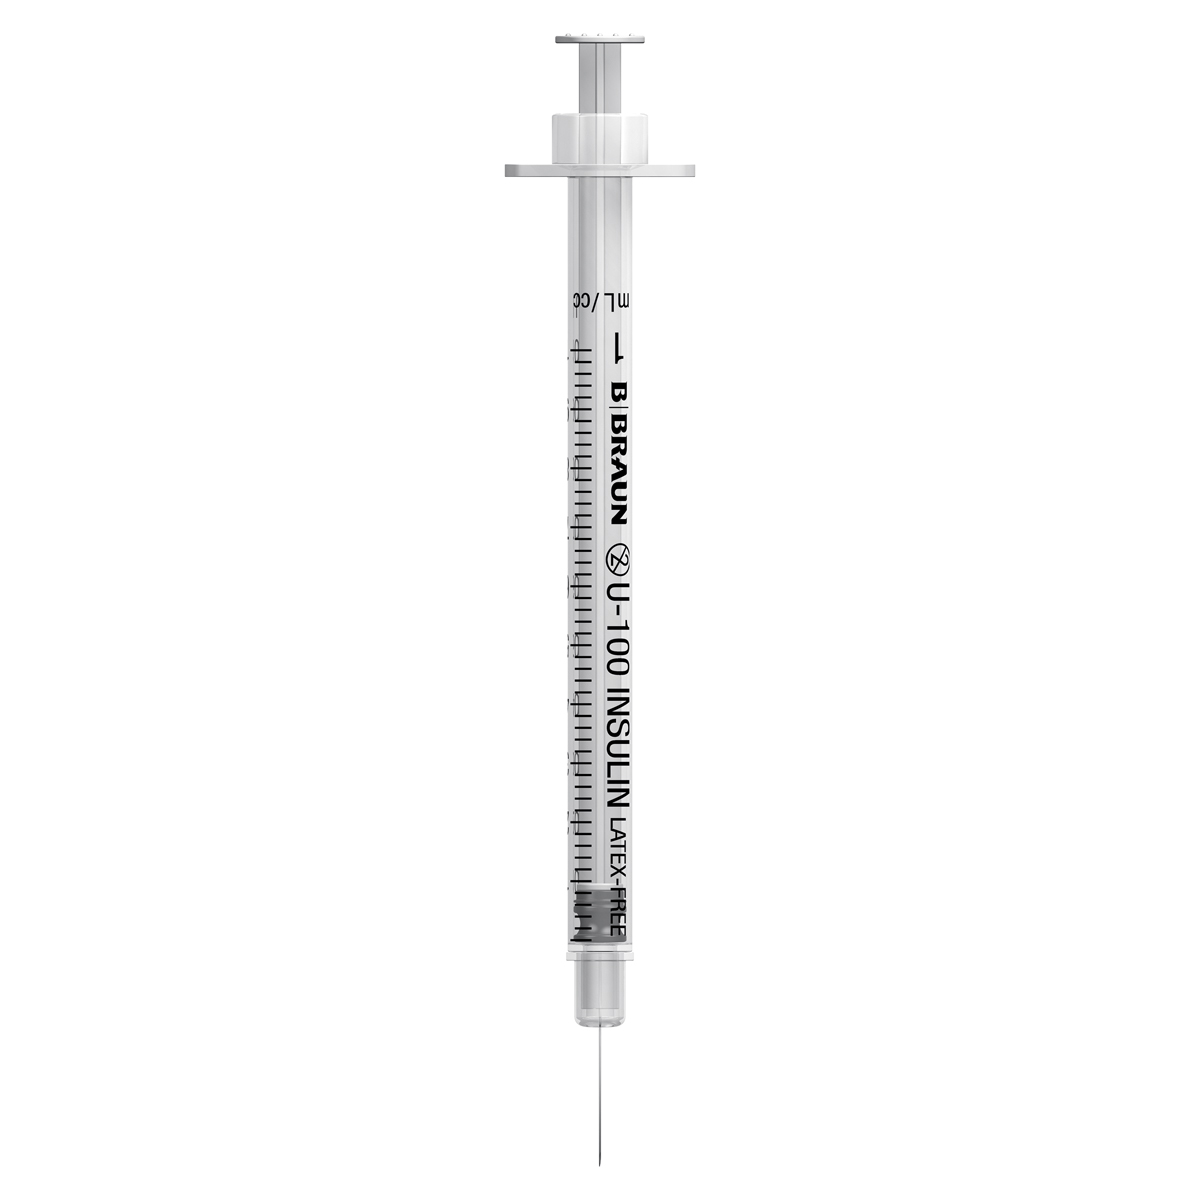 BBraun Omnican 1ml 30G insulin syringe (ind blister packed) - temp out of stock